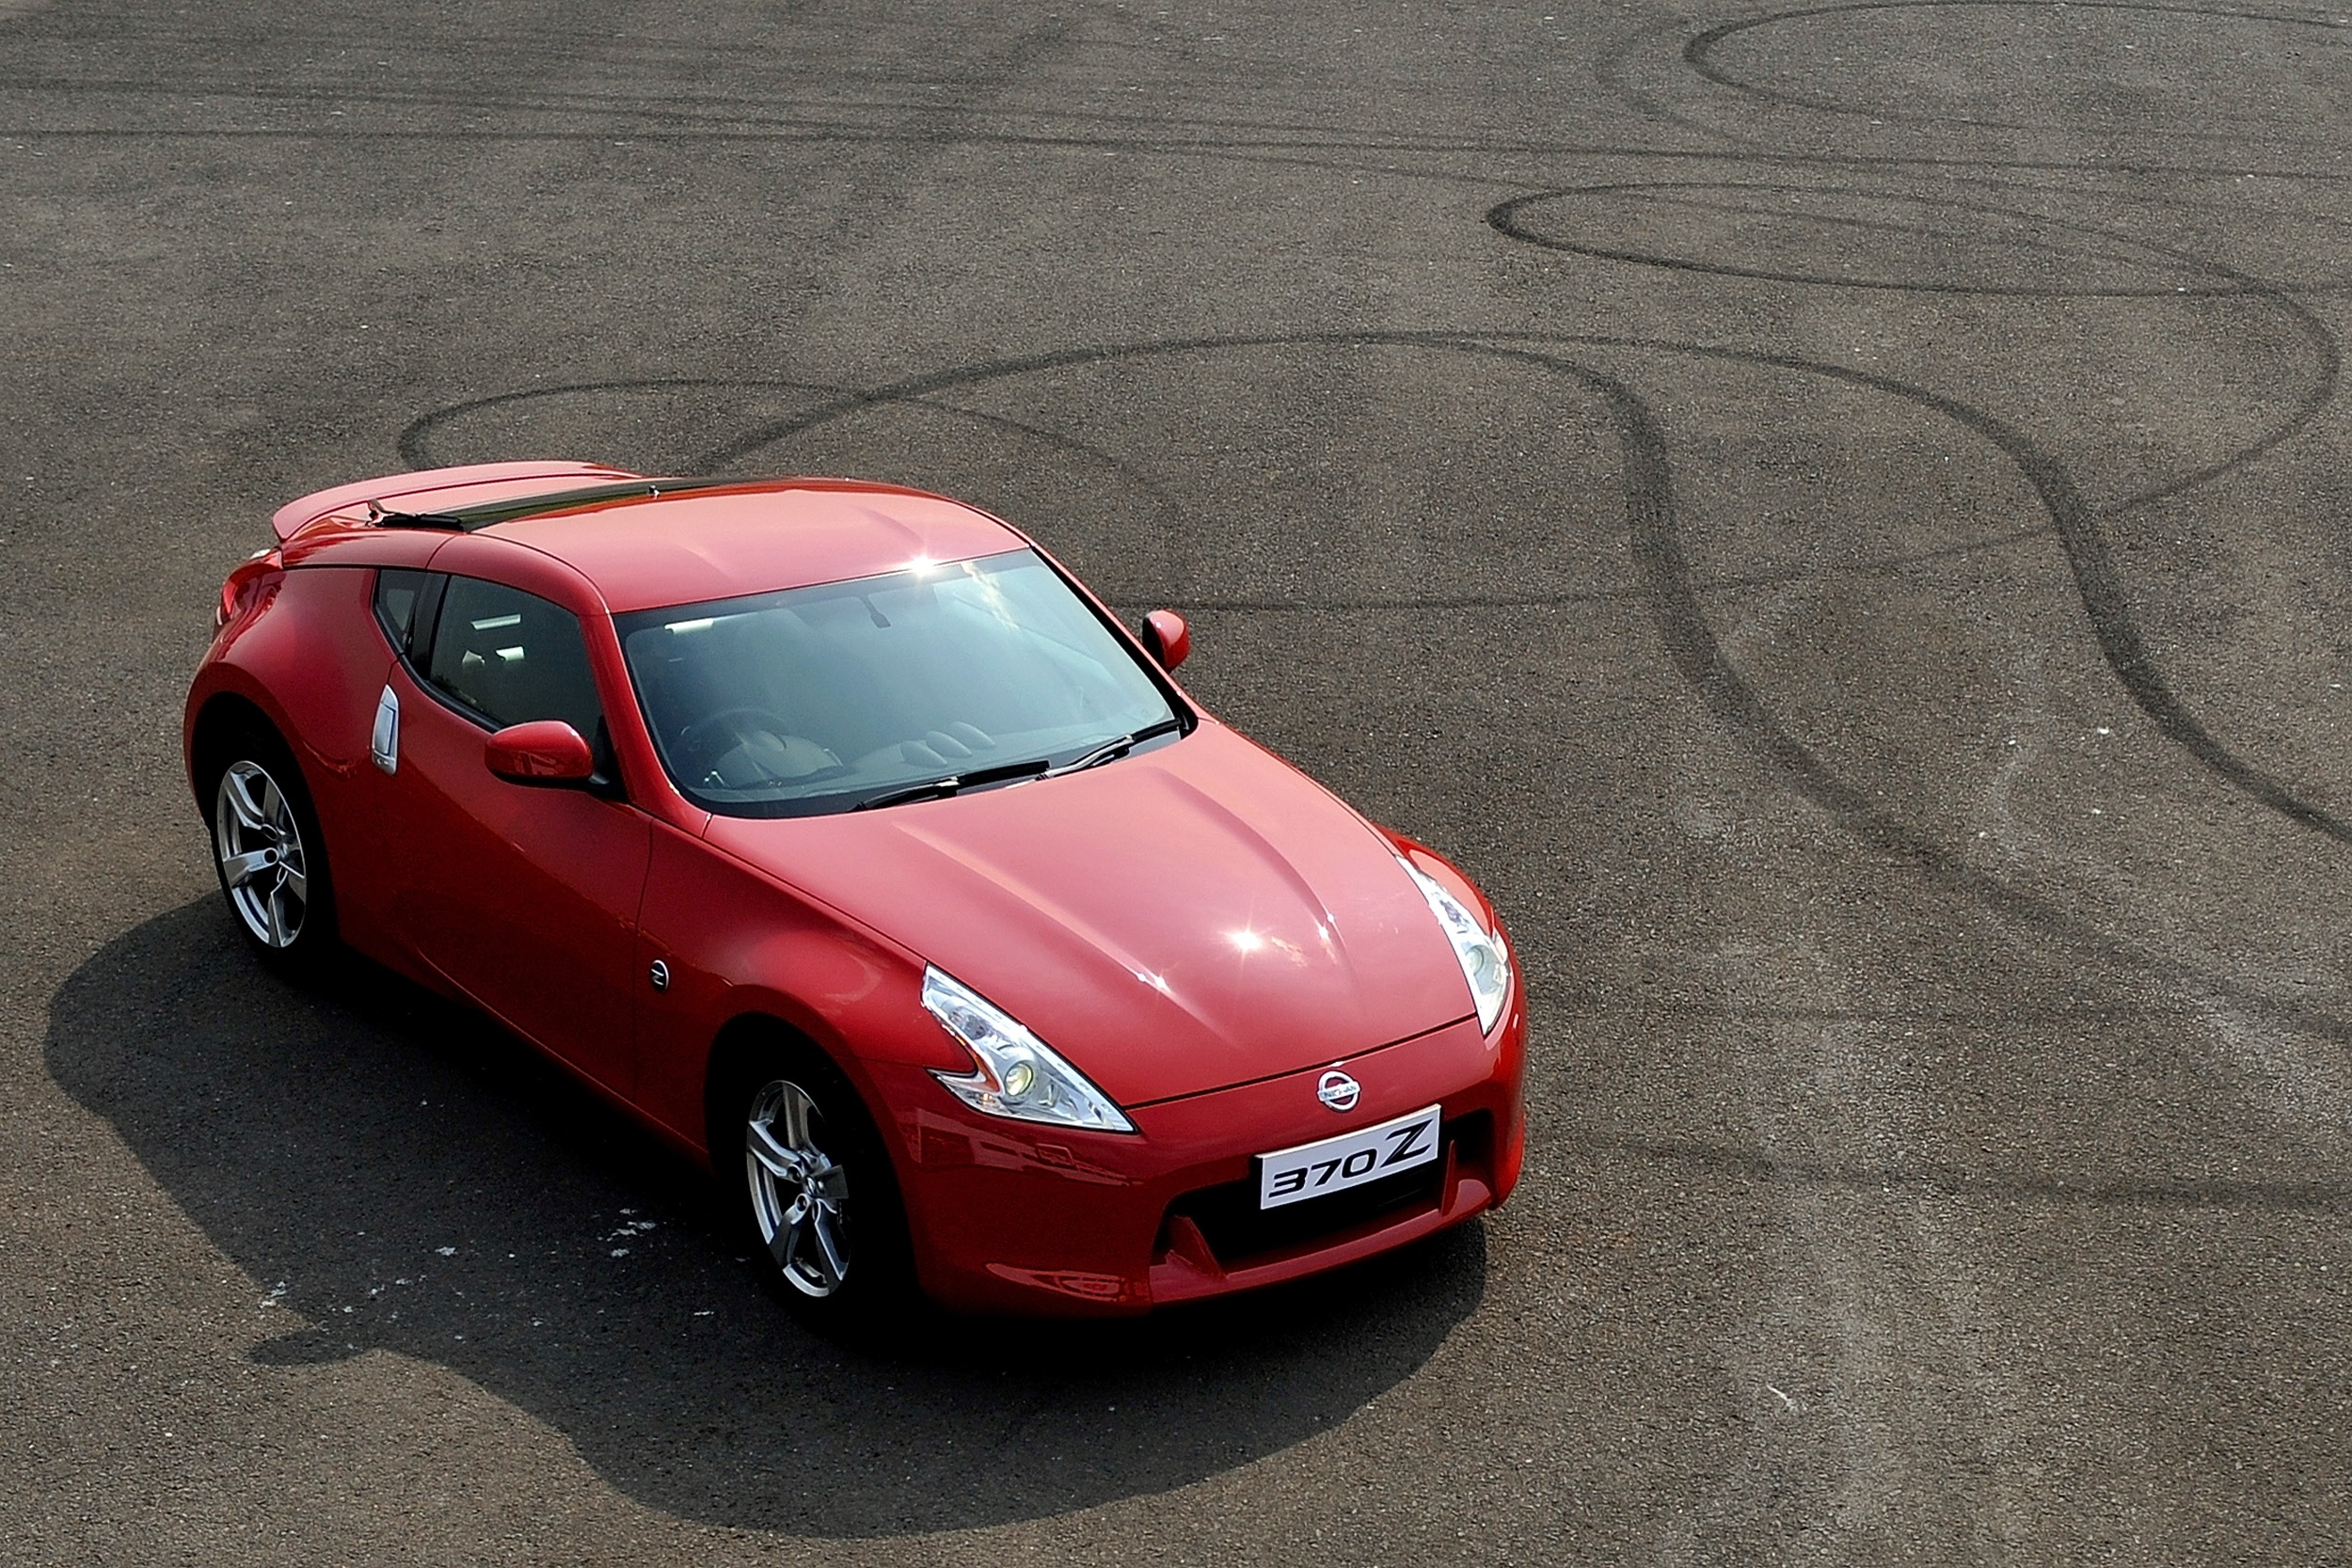 A red Nissan 370Z shot from above on tarmac